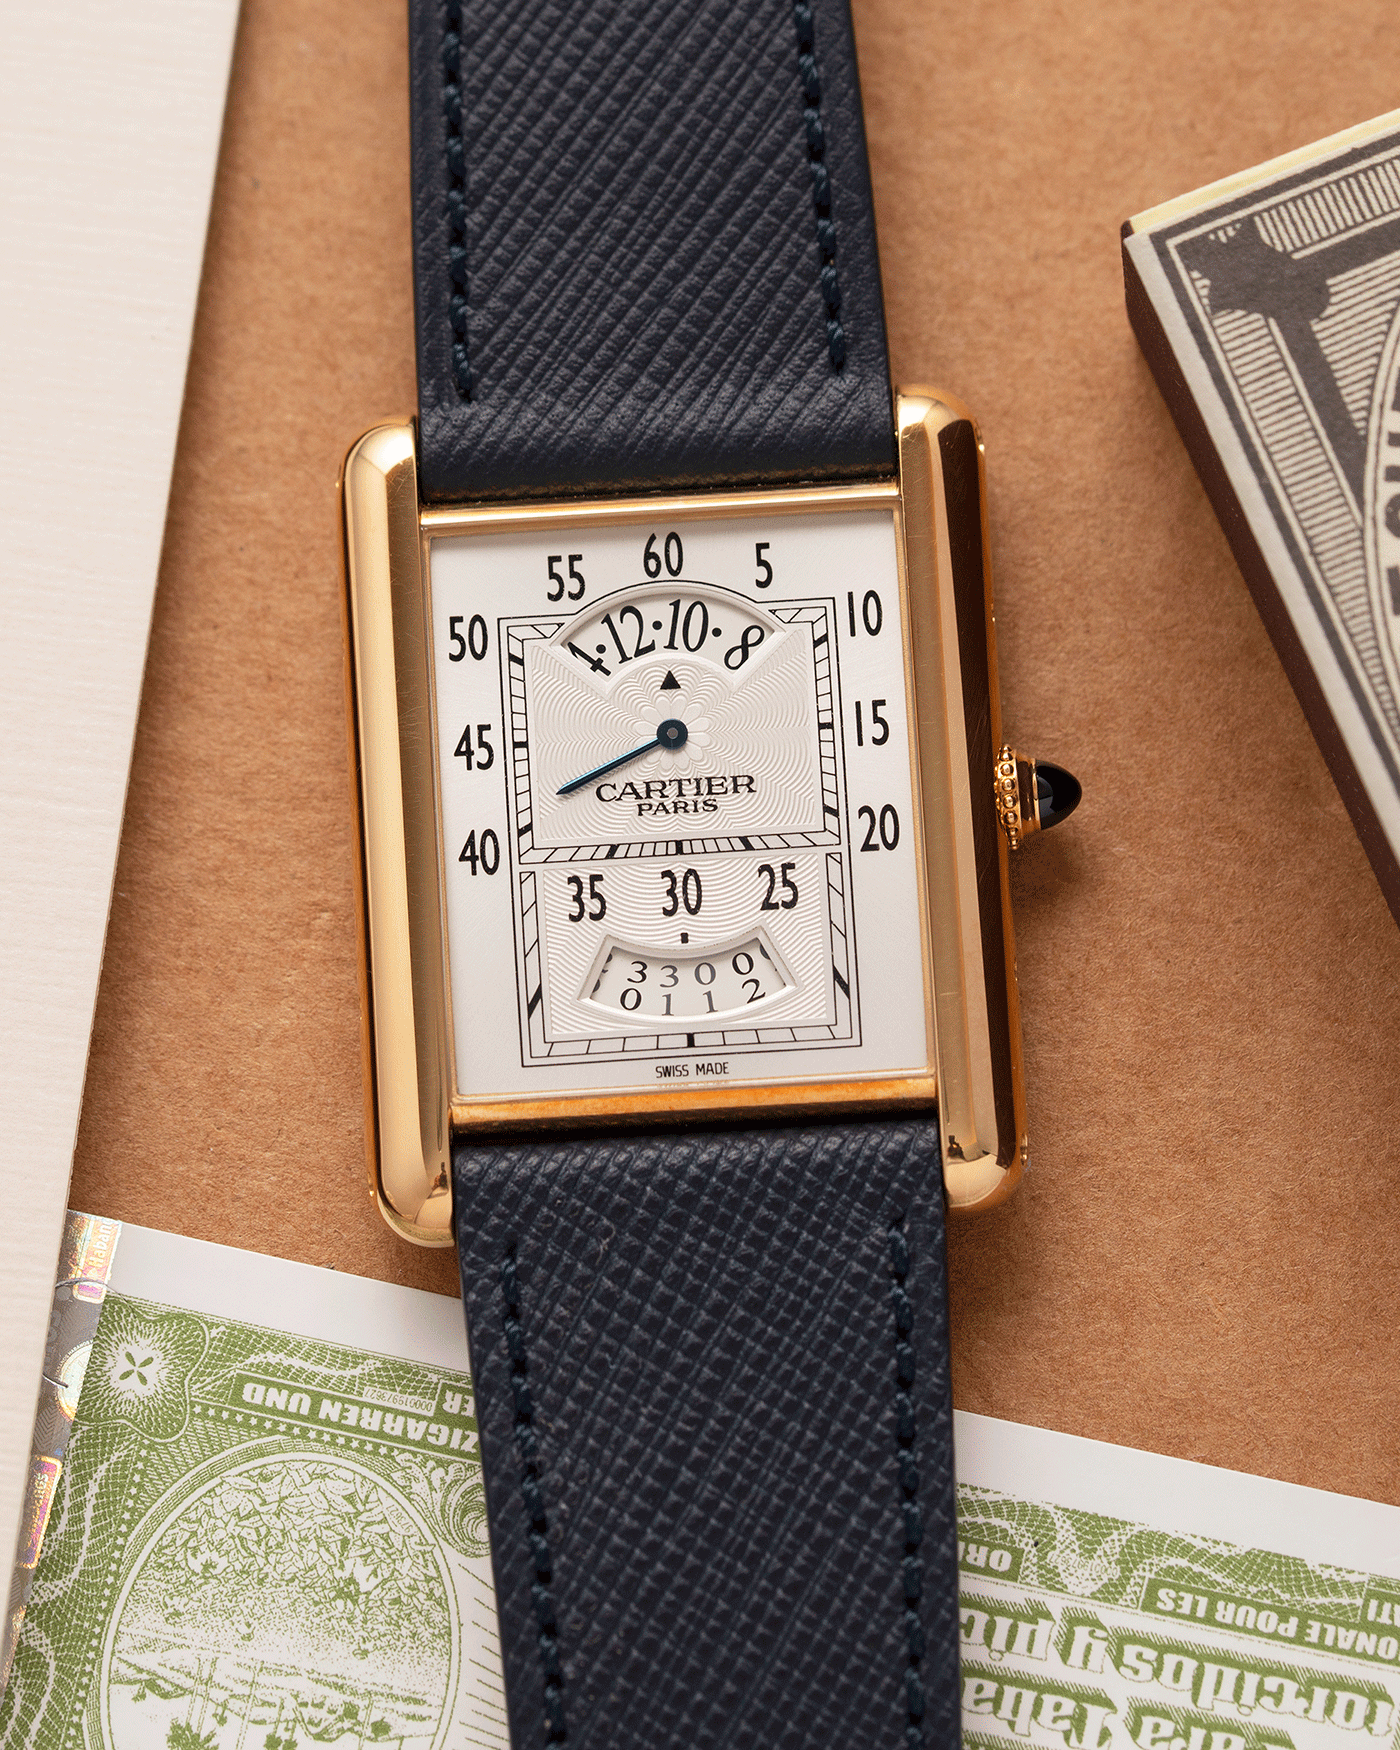 Brand: Cartier Year: 2005 Model: Collection Prive Tank Louis Cartier Wandering Hours Reference: 2918 Material: 18k Rose Gold Movement: Piaget-Based Manually Wound Cal. 9902 MC Case Diameter: 28mm width, 40.5mm lug to lug Strap: Navy Blue Molequin Textured Calf Strap with separate 18k Cartier Rose Gold Deployant